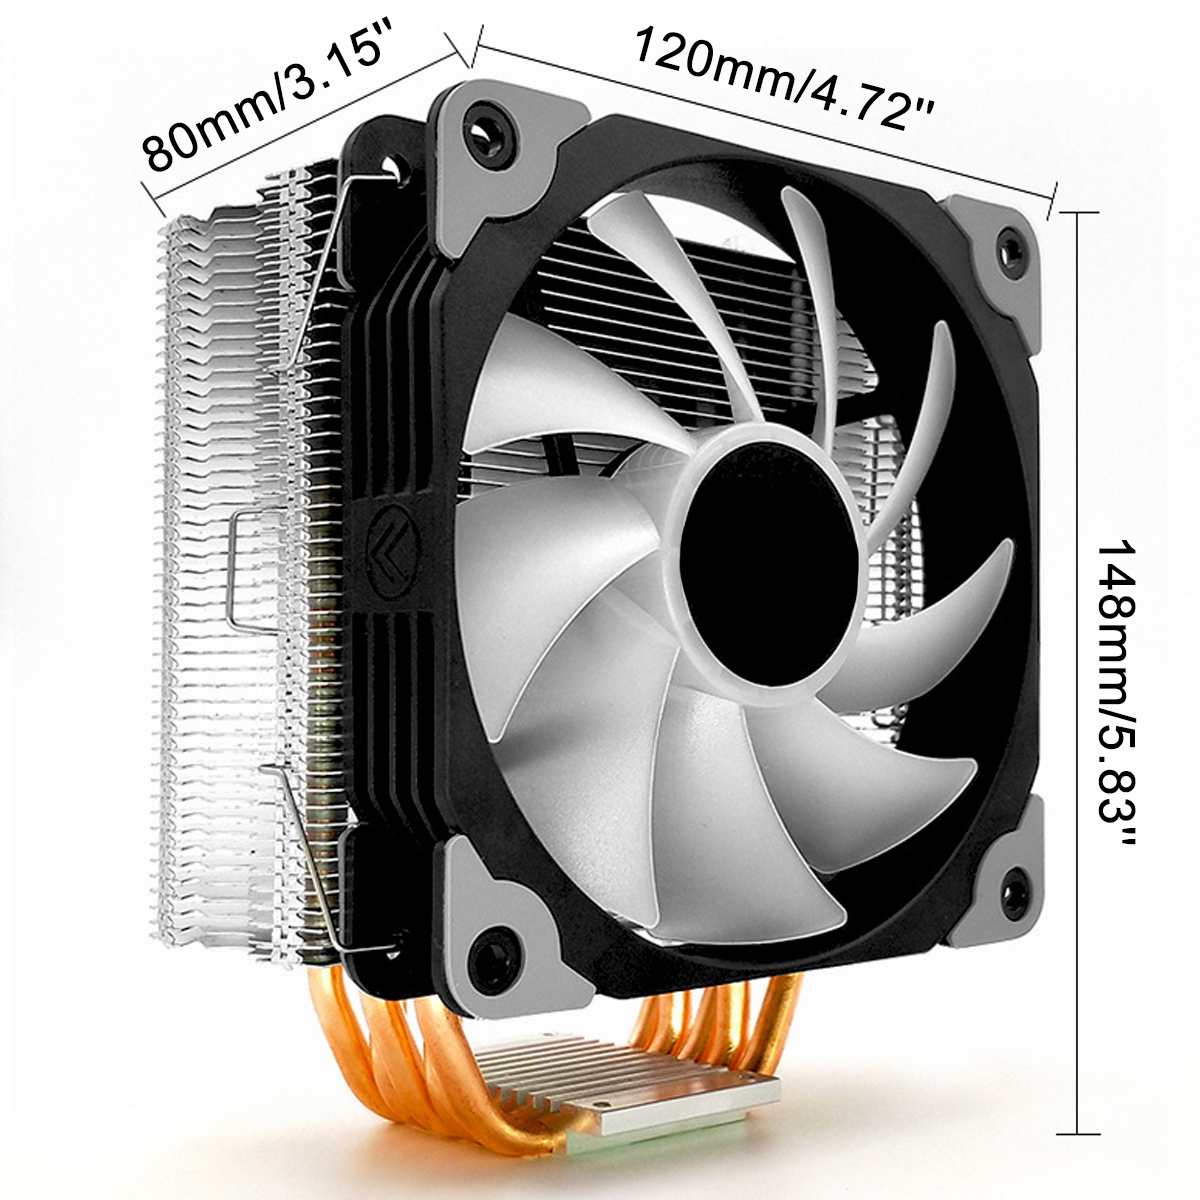 Find RGB 5 Copper Tube 4 Pin Single/Dual Fan CPU Cooler For Intel/AMD for Sale on Gipsybee.com with cryptocurrencies